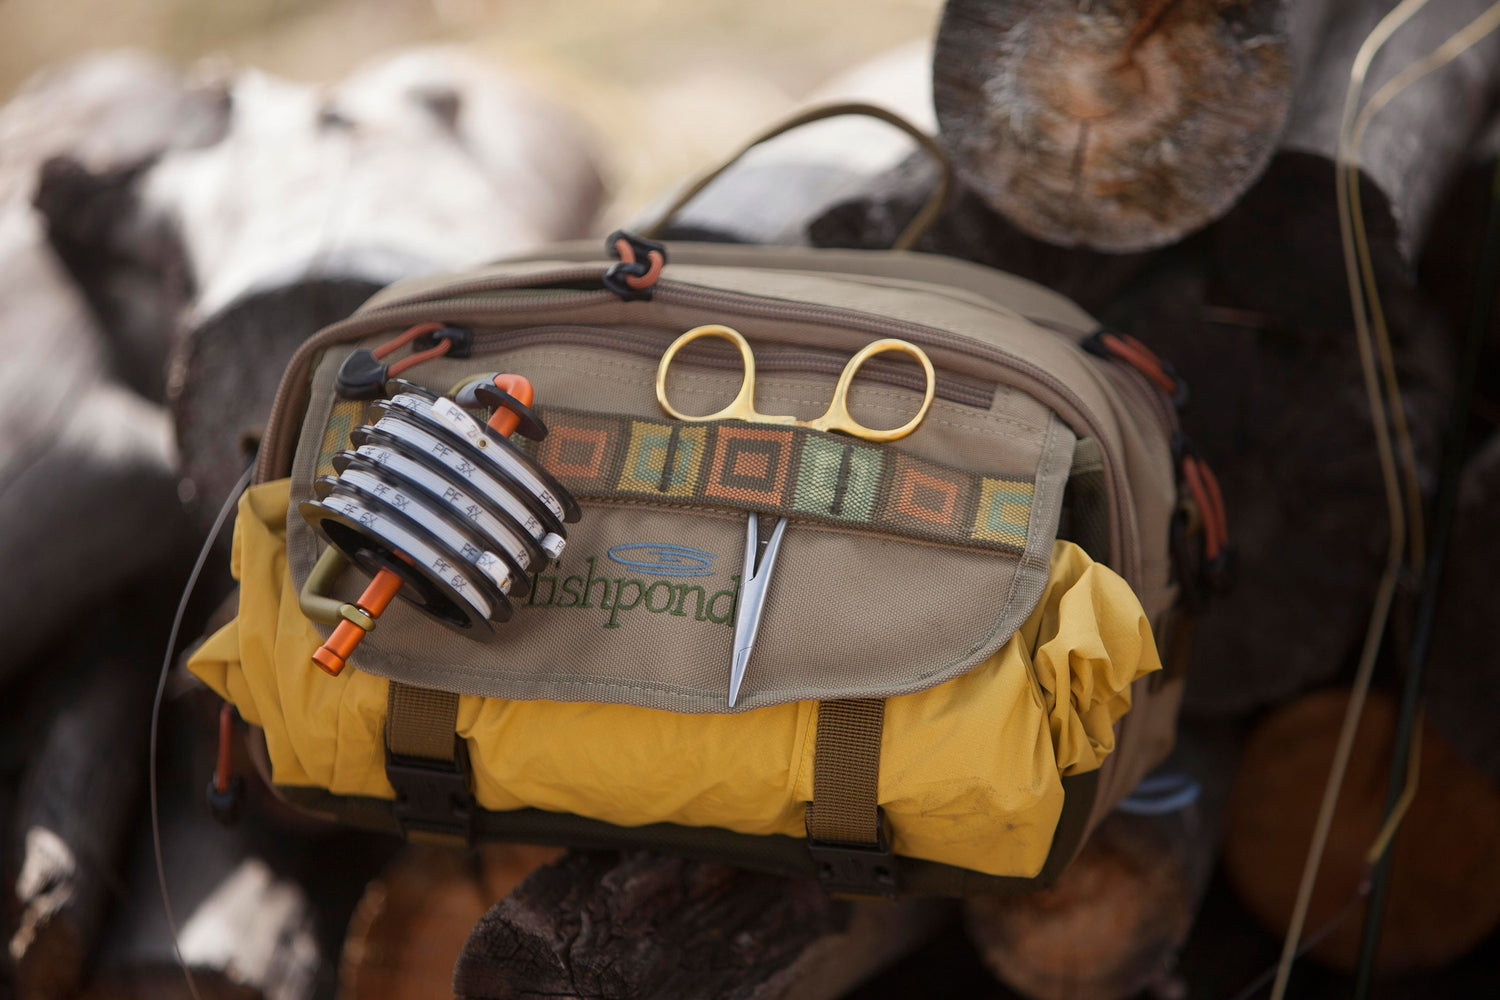 Fishpond Chest Lumbar Pack, The Fishin' Hole